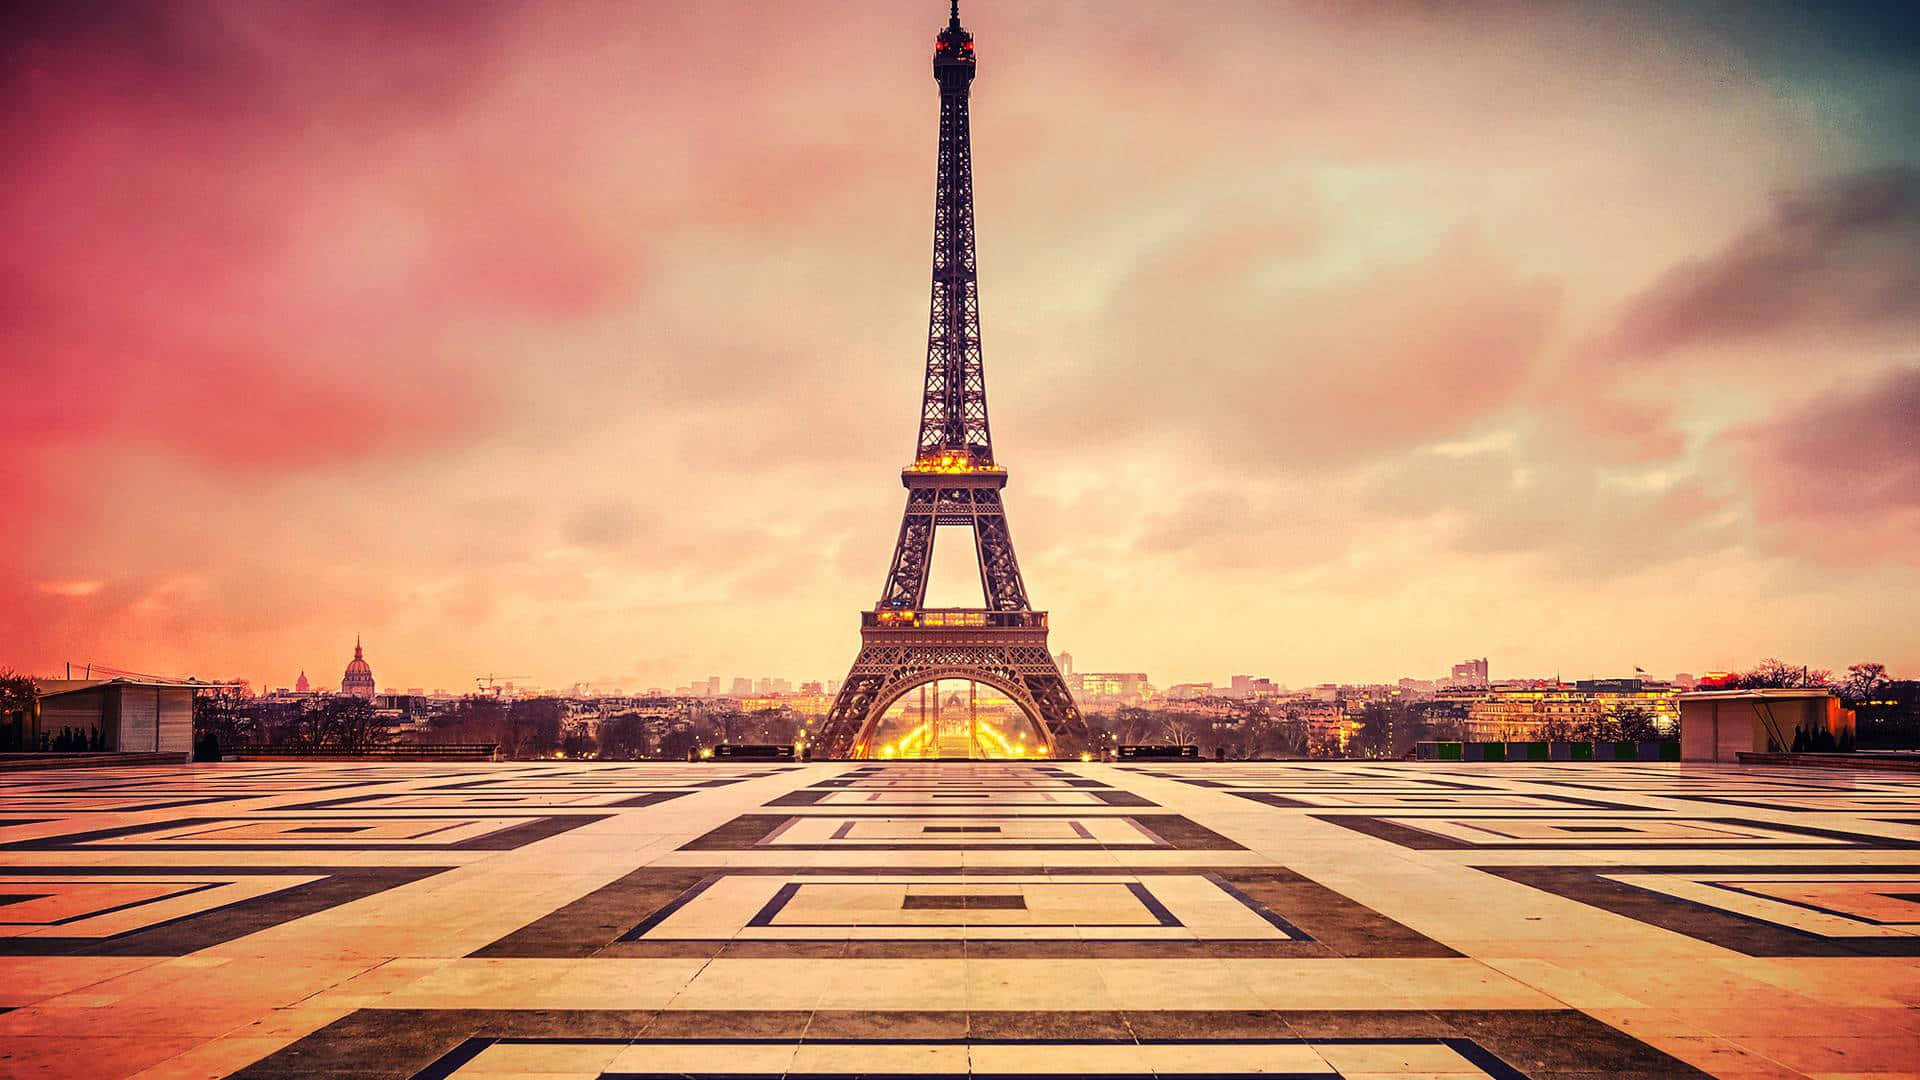 Visit Paris, the Eiffel Tower and its surrounding city